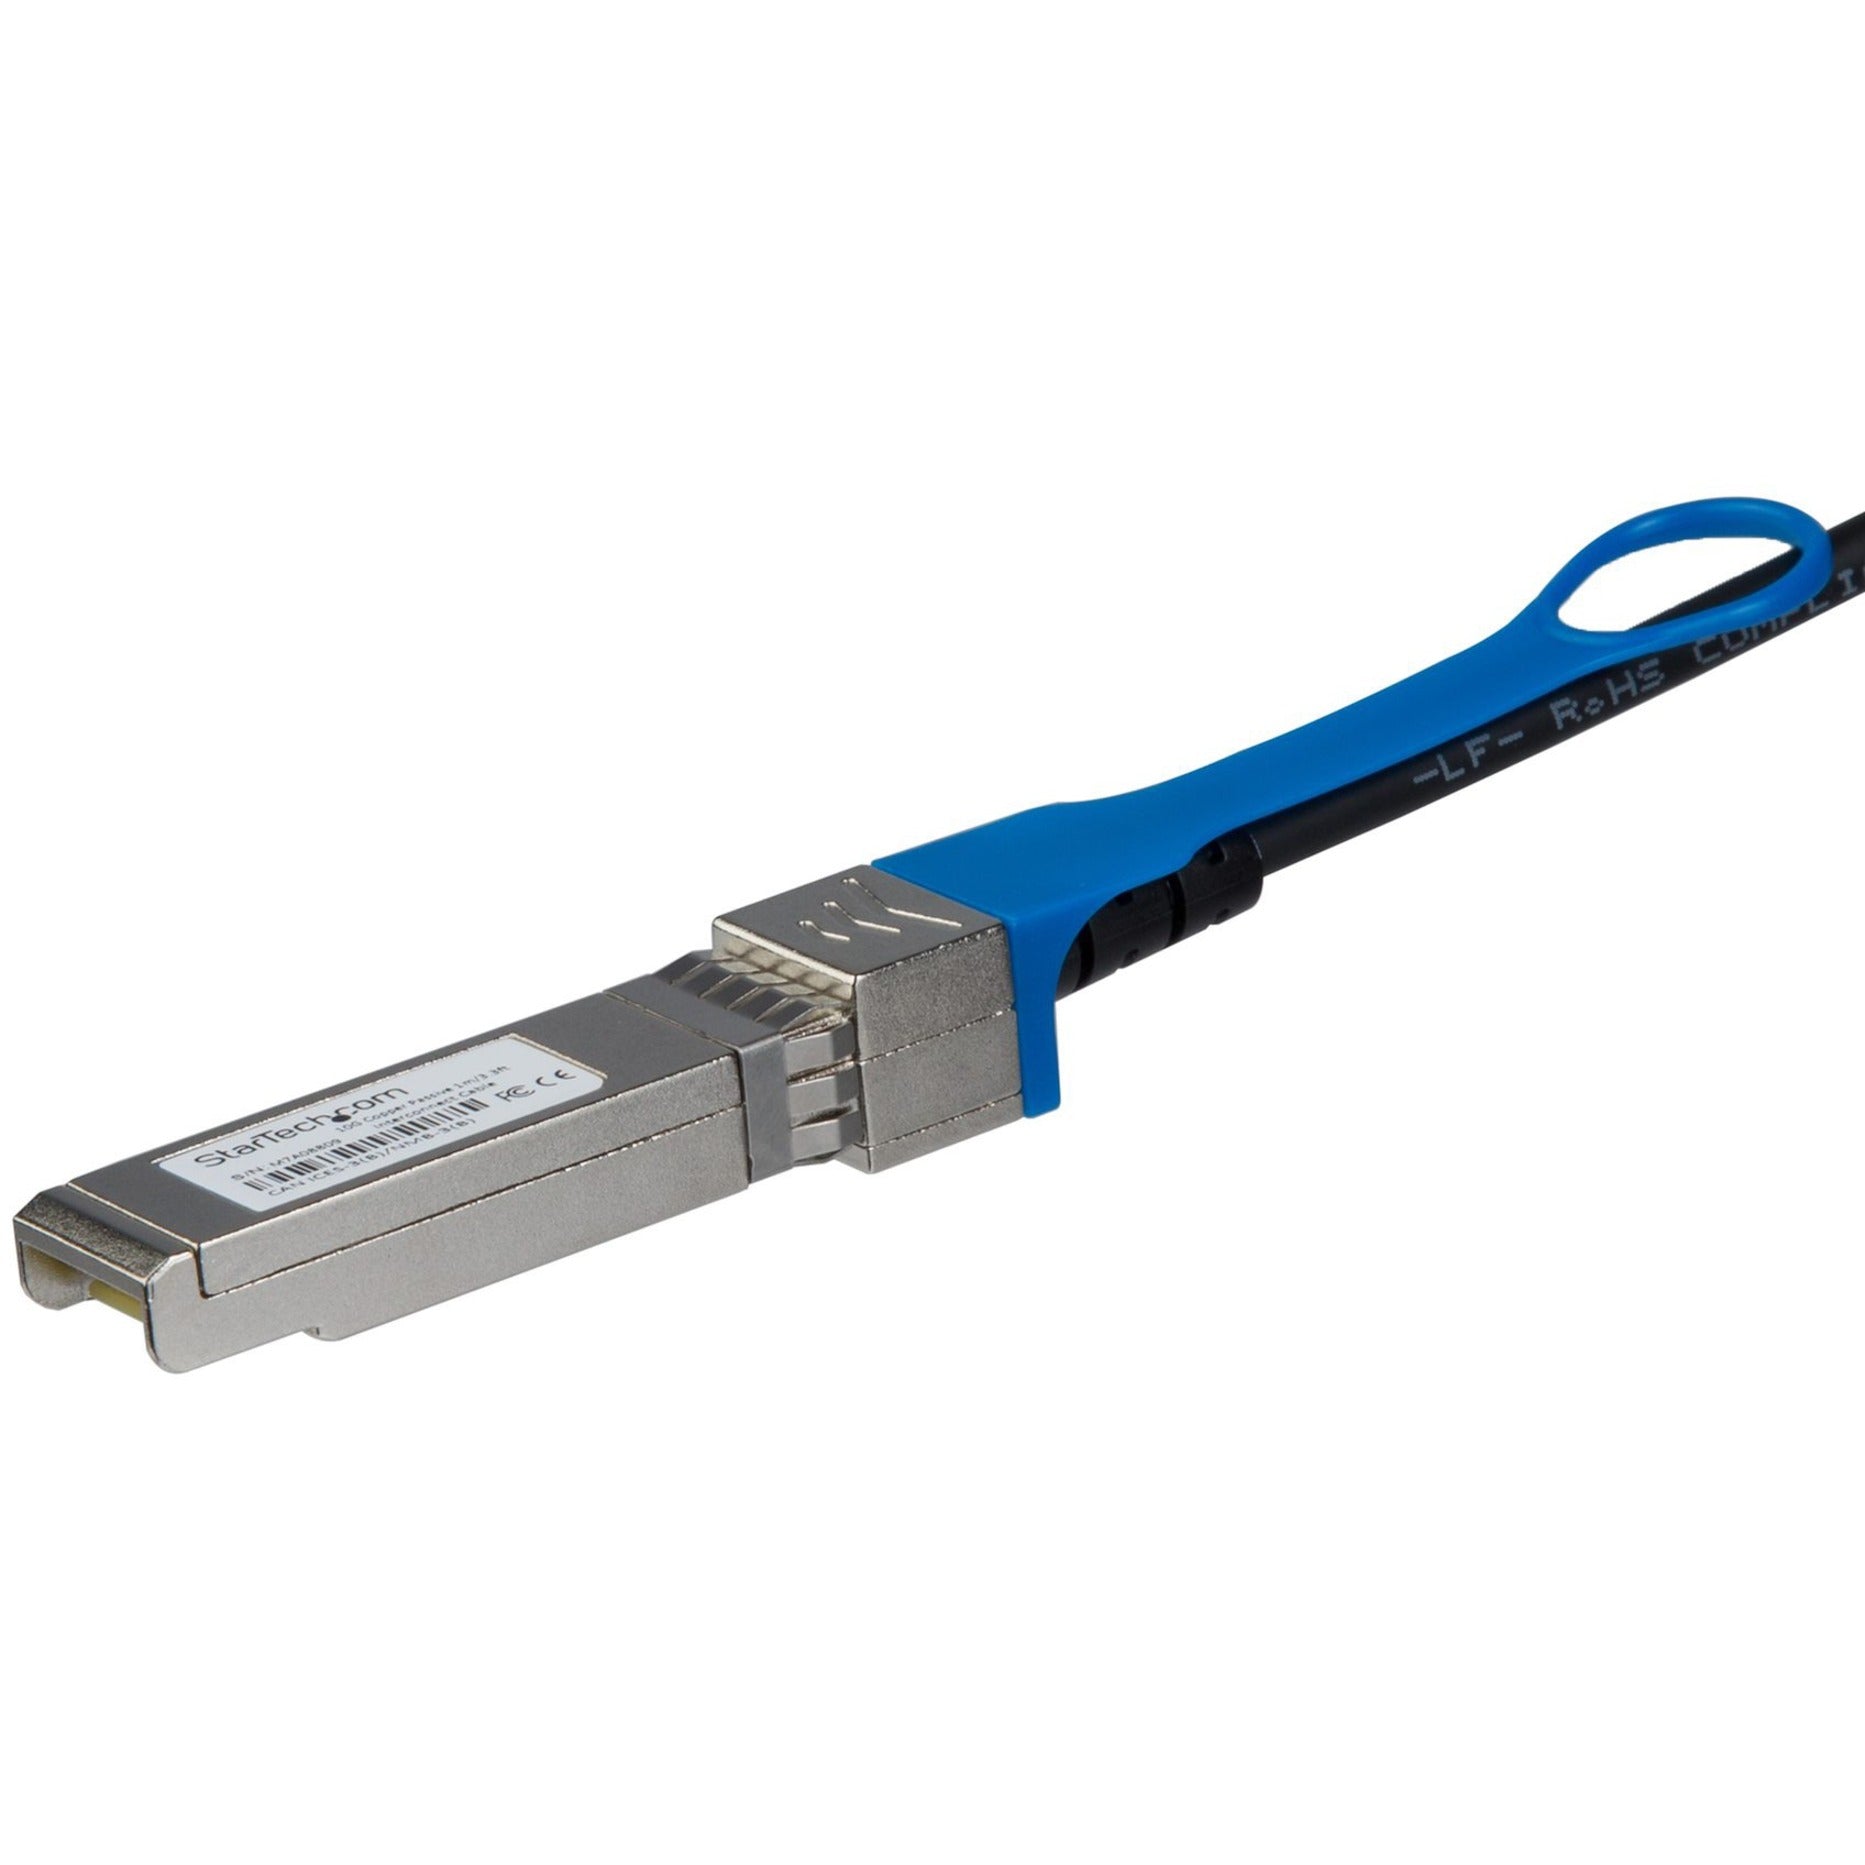 StarTech.com SFP10GAC10M SFP+ Direct Attach Cable - MSA Compliant - 10 m (33 ft.), Hot-swappable, Active, 10 Gbit/s Data Transfer Rate